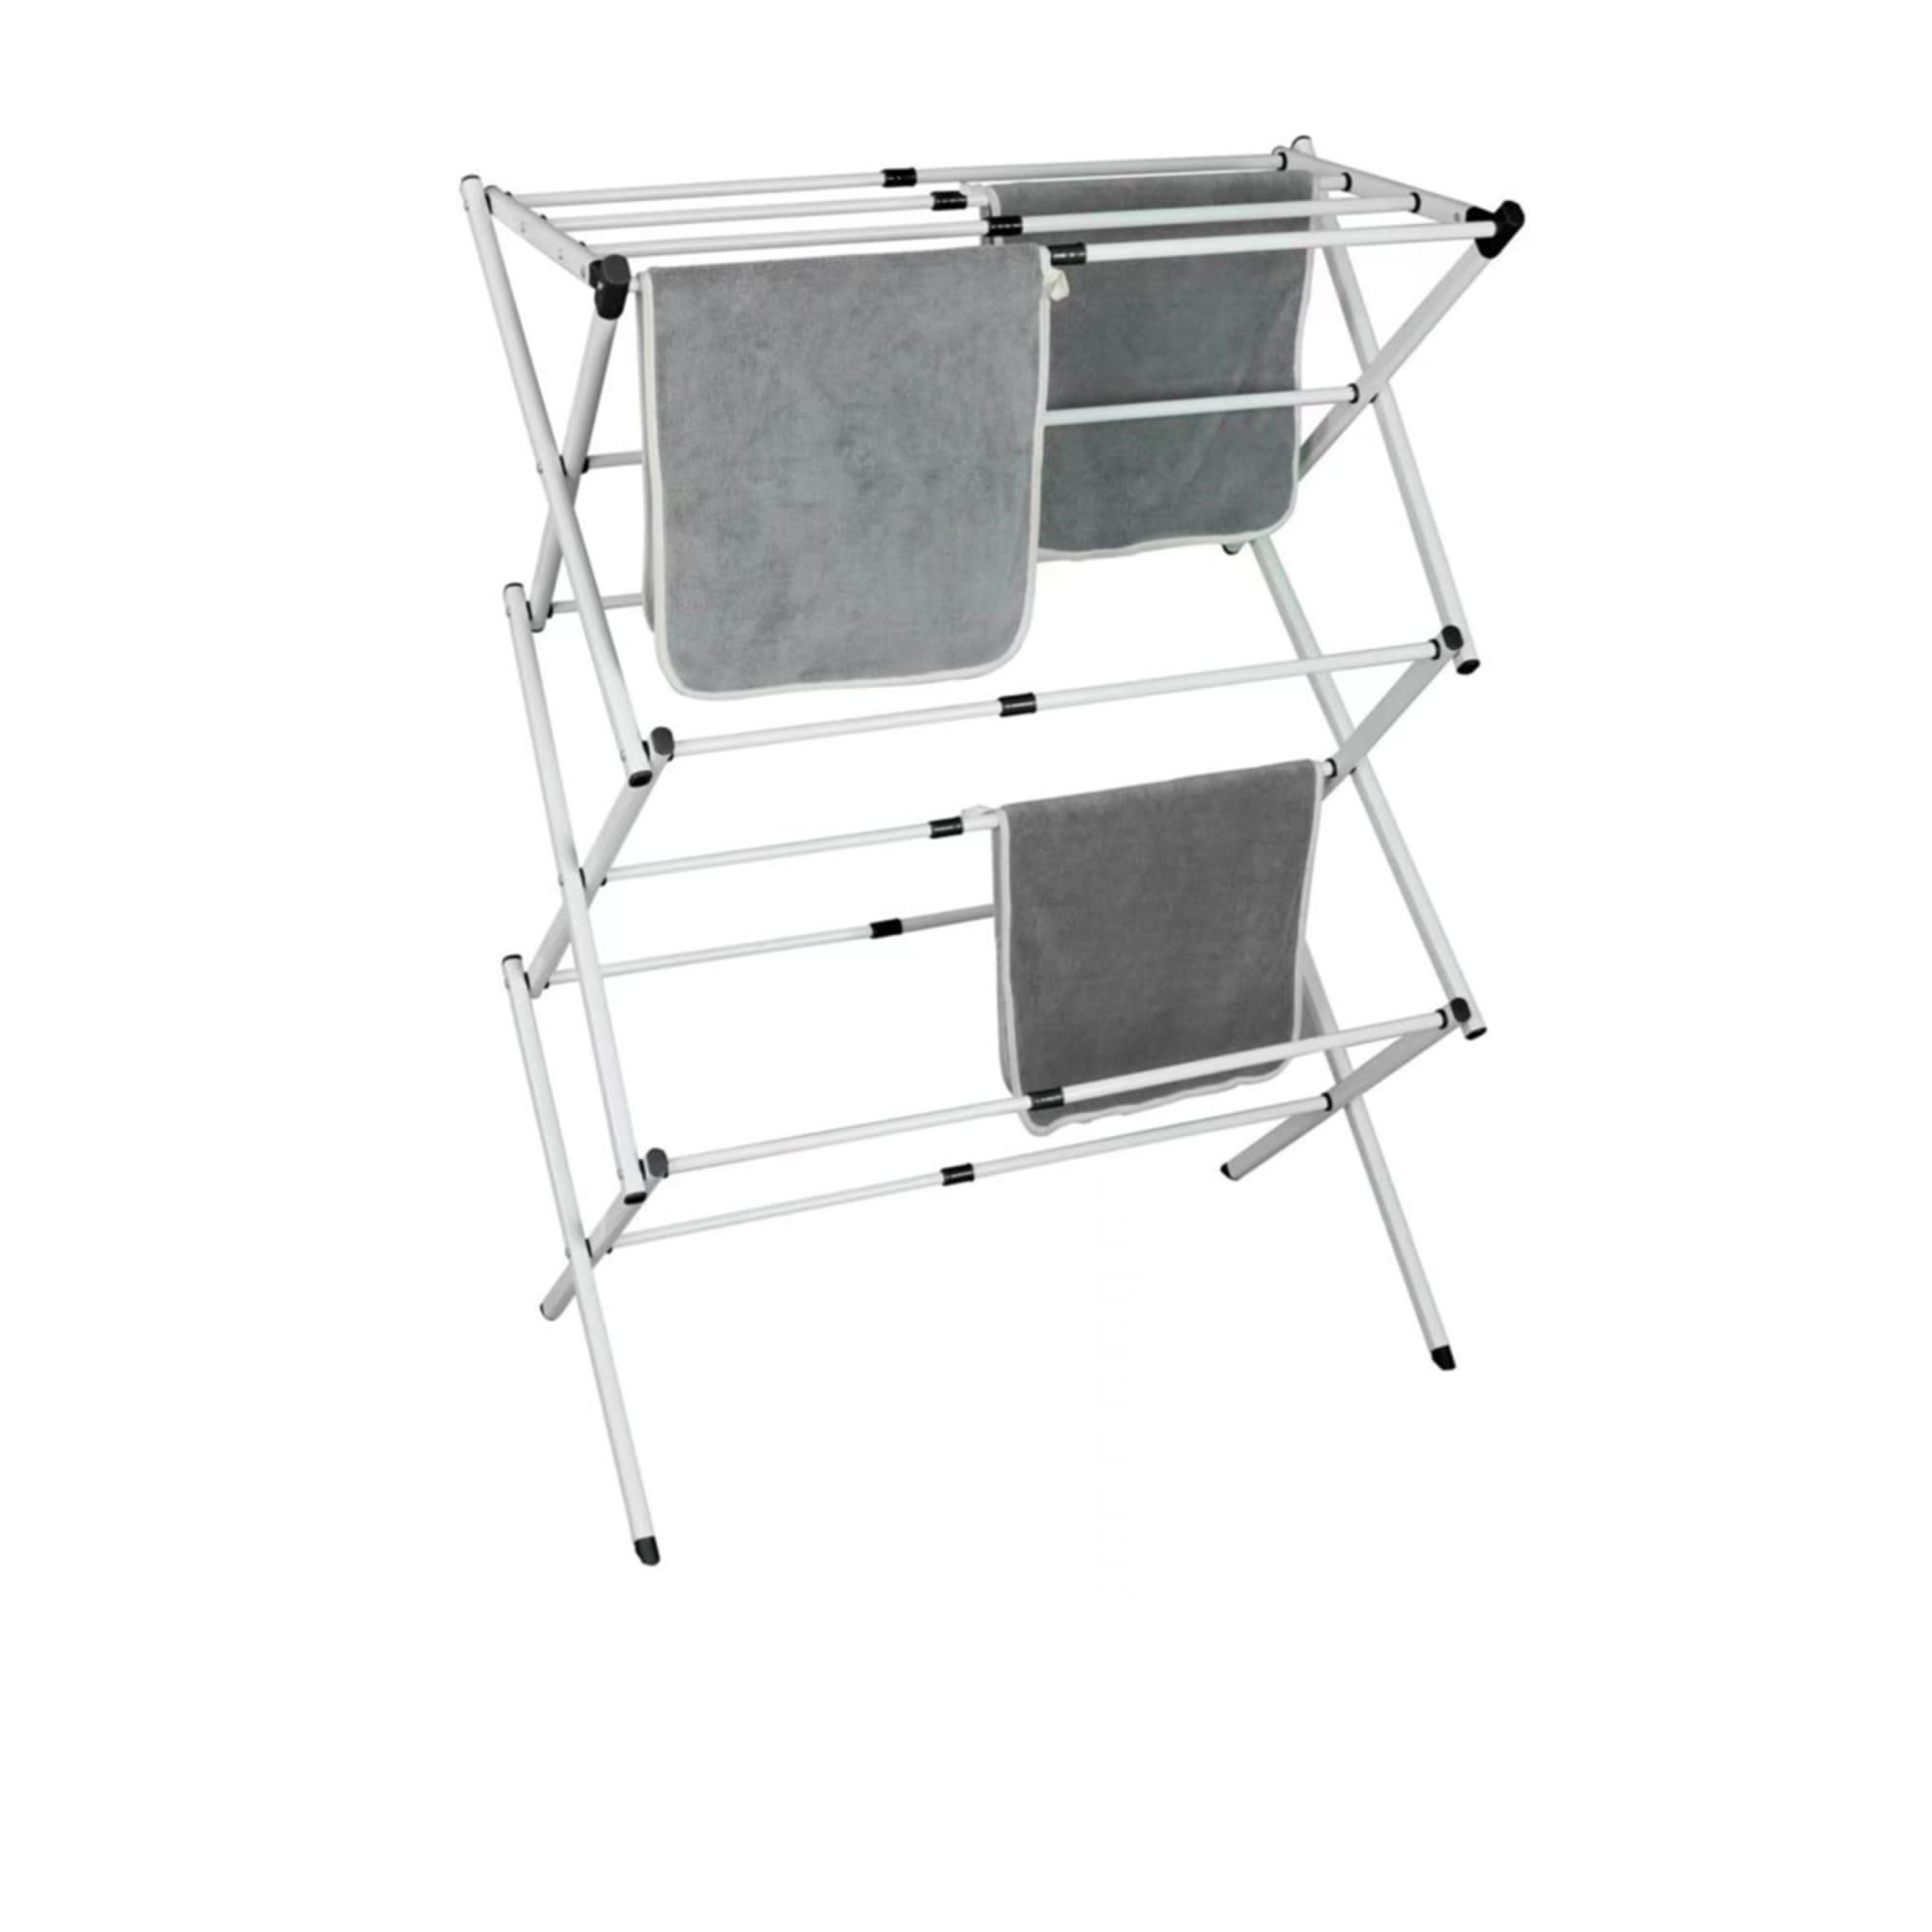 Butlers Suite 3 Tier Expanding Drying Rack White Image 4